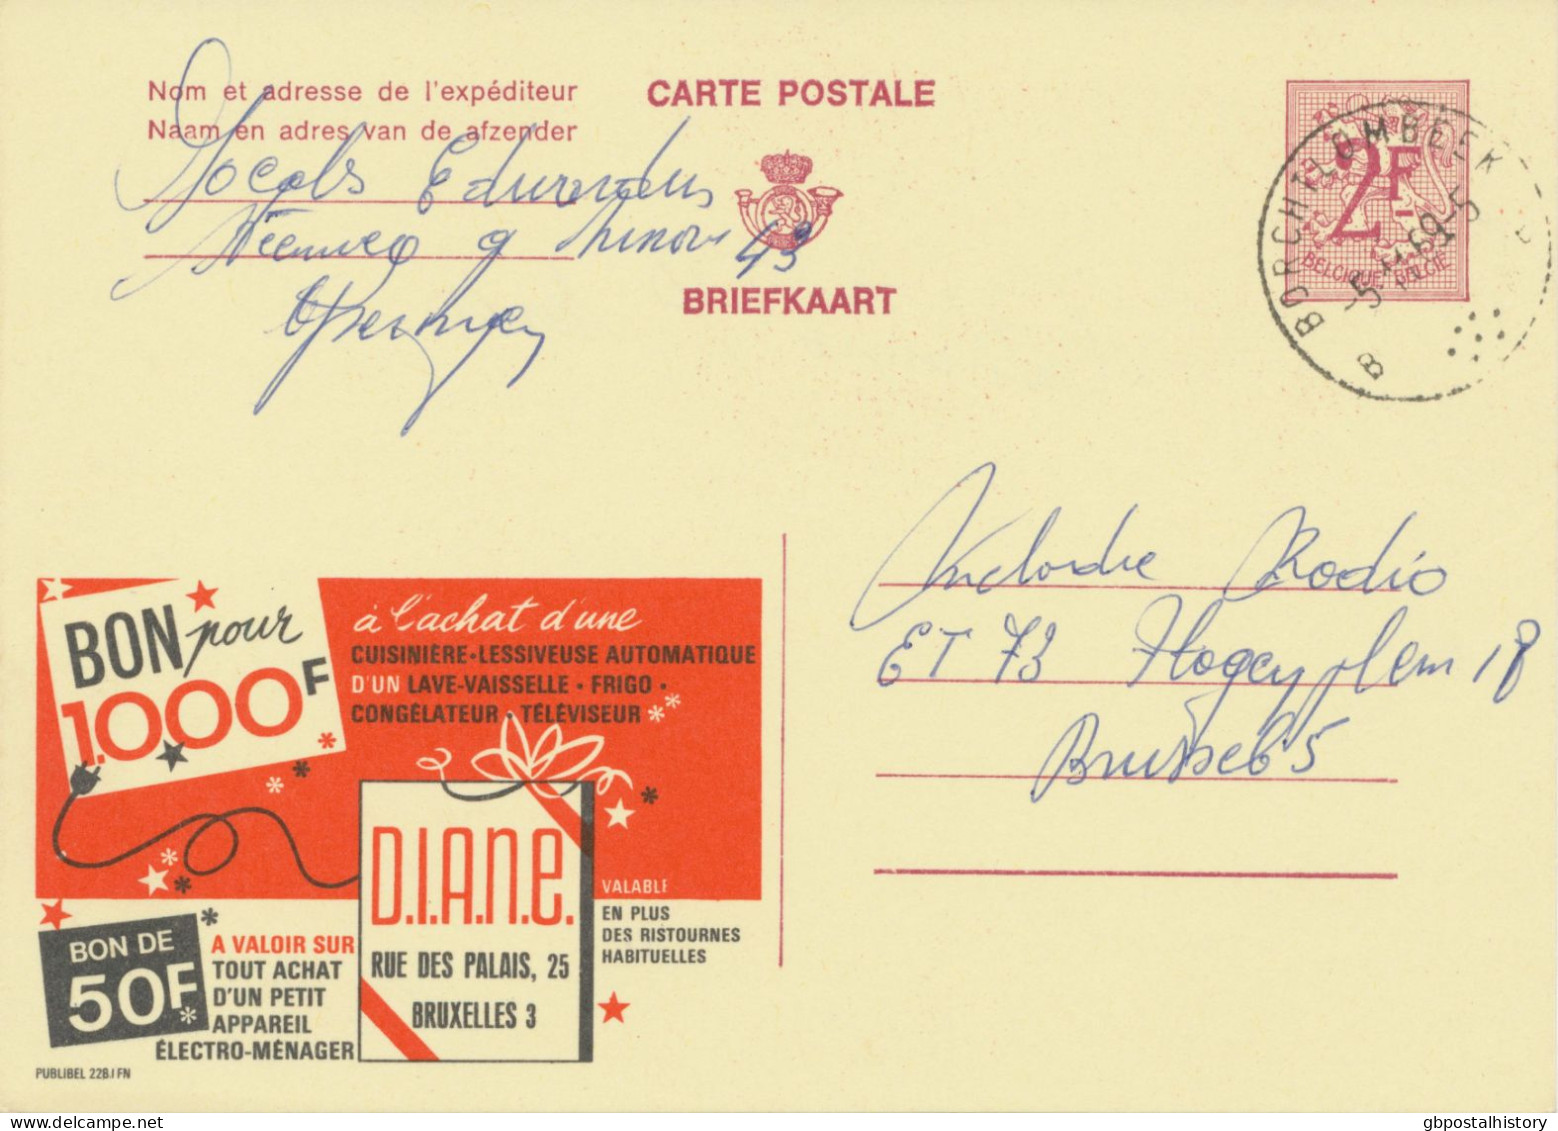 BELGIUM VILLAGE POSTMARKS  BORCHTLOMBEEK B (now Roosdaal) SC With Dots 1969 (Postal Stationery 2 F, PUBLIBEL 2281FN) - Annulli A Punti